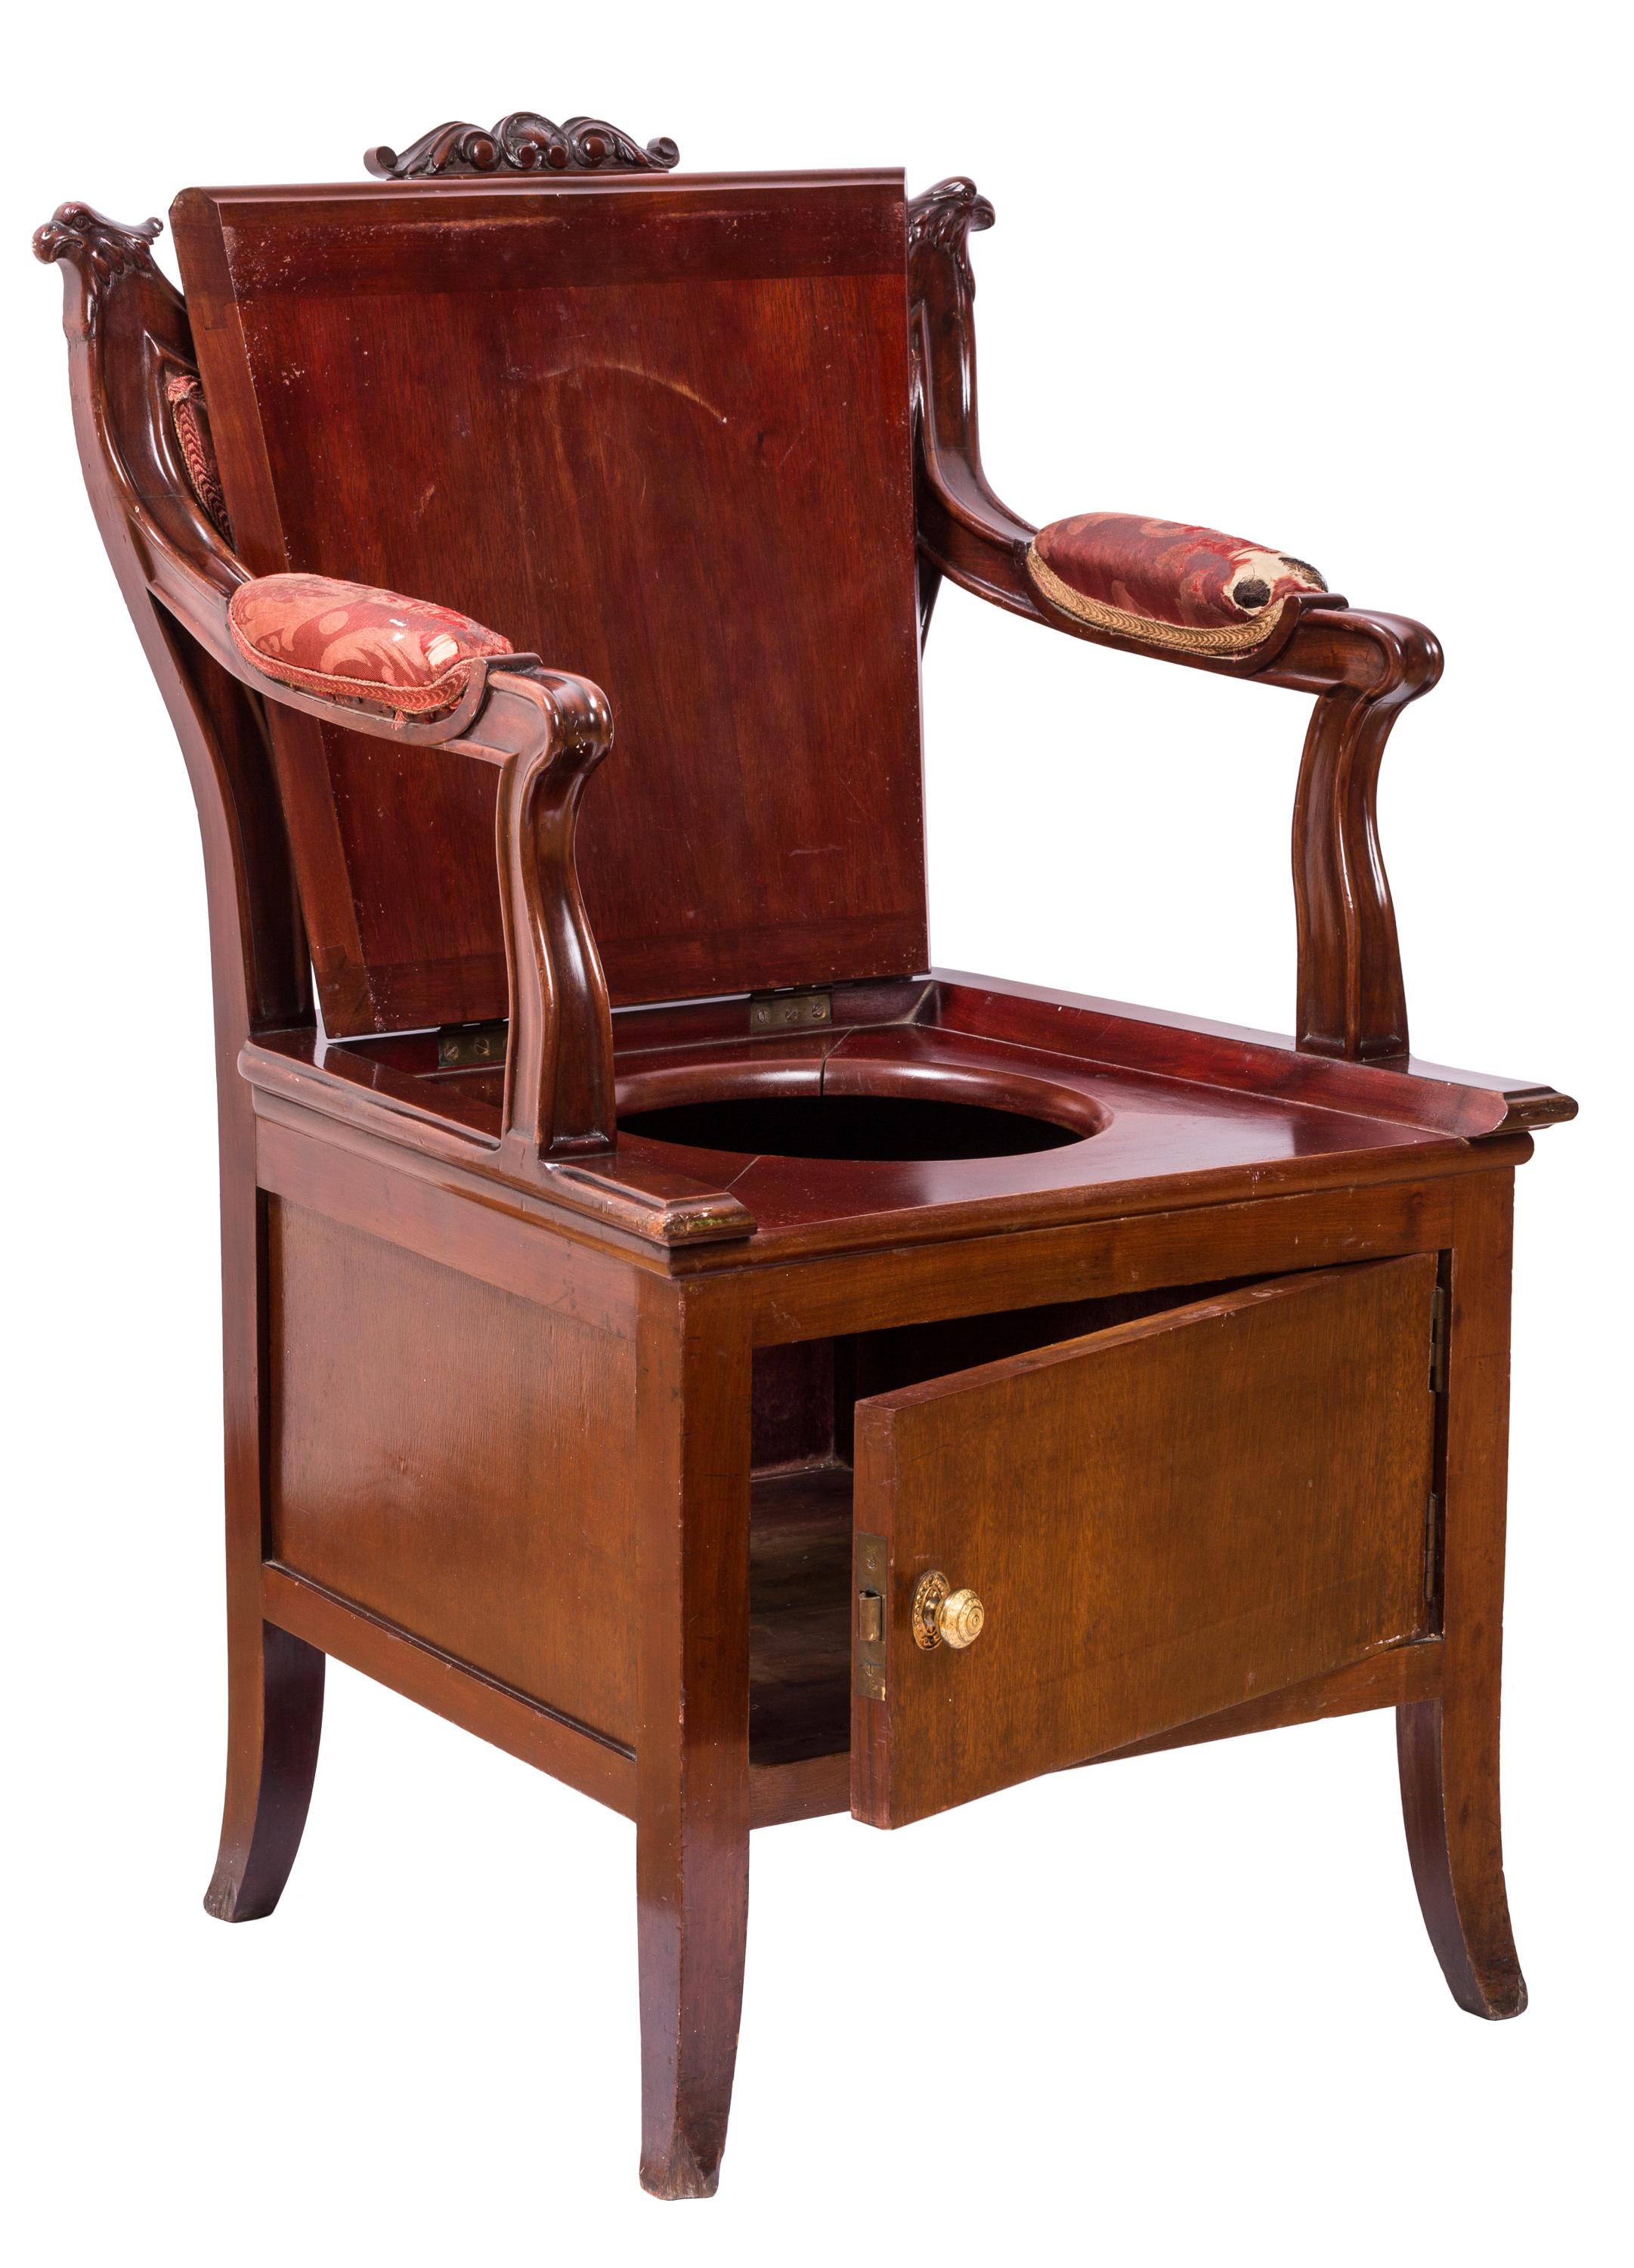 19th Century French Second Empire Style "Chaise Percée" Throne, a Curiosity  For Sale at 1stDibs